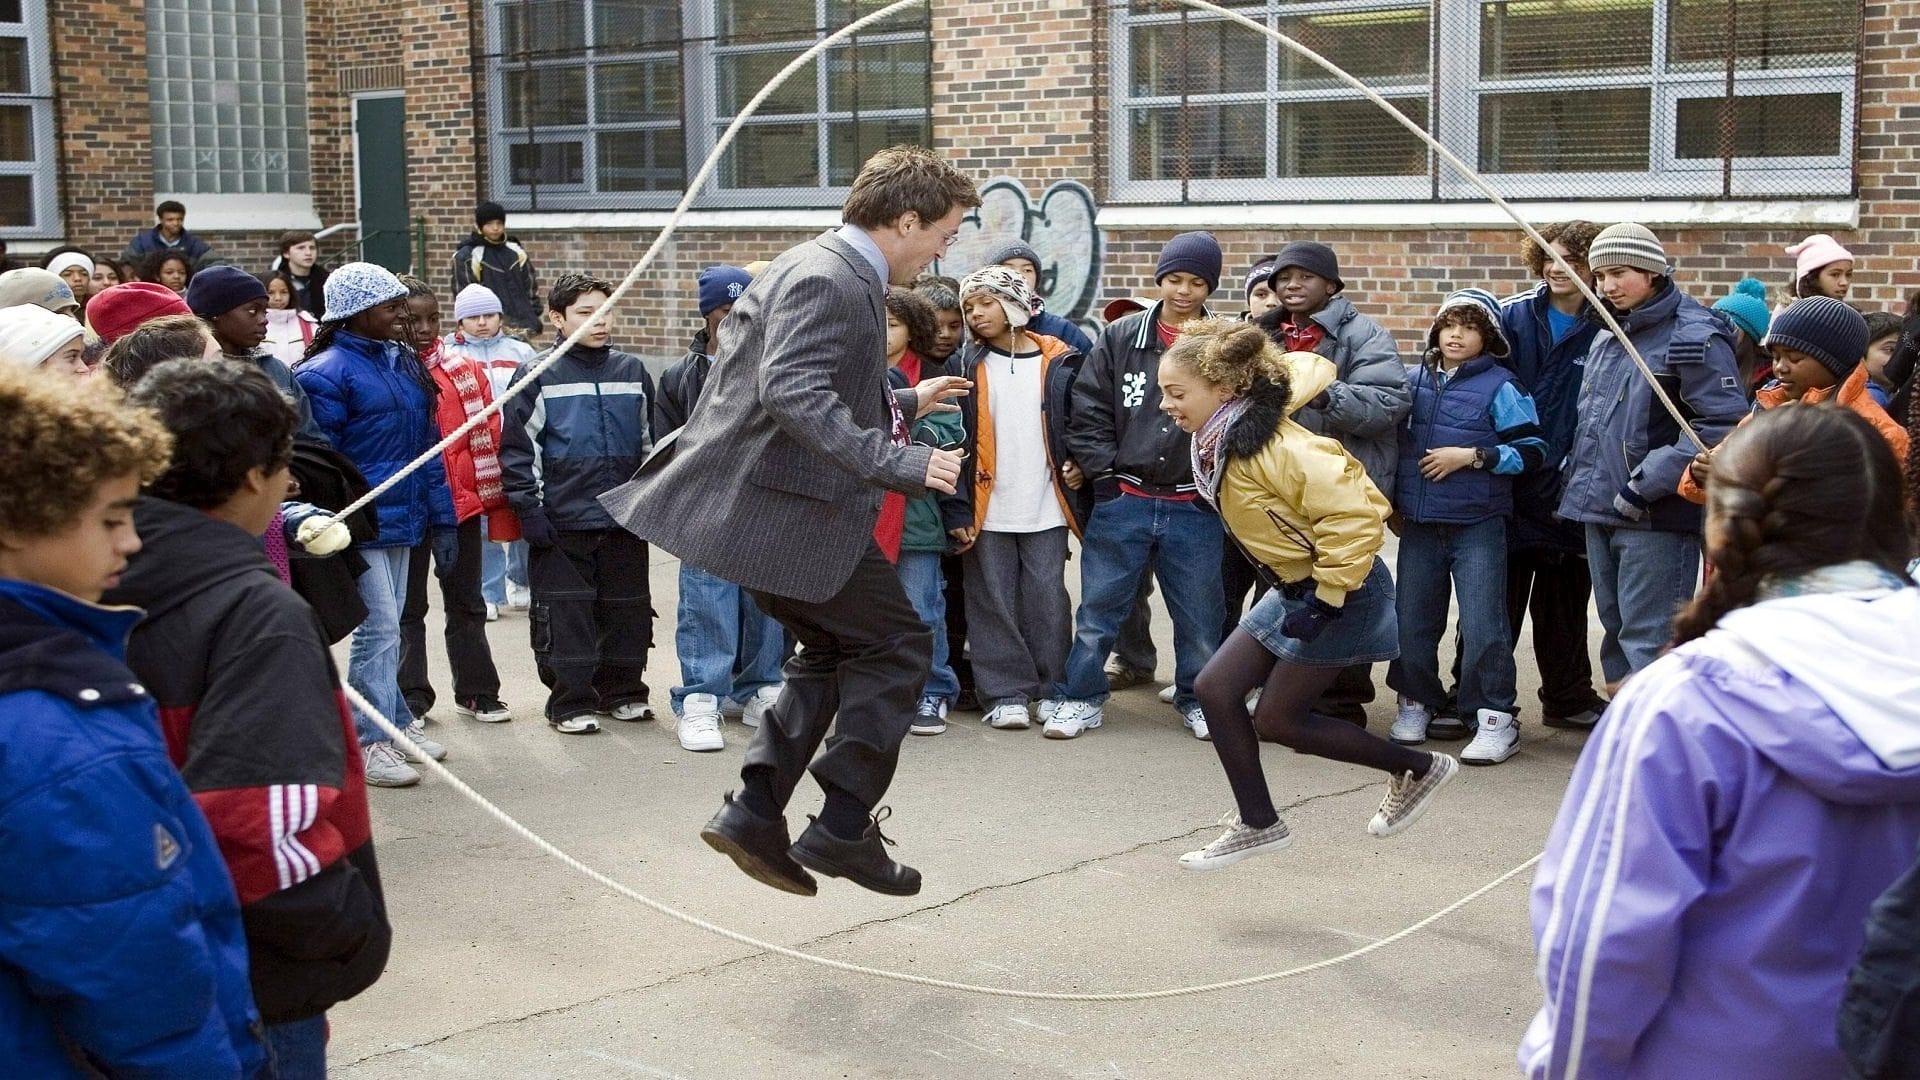 The Ron Clark Story (Movie): Inner Harlem Elementary School, The most disadvantaged class, Matthew Perry, The first Golden Globe nomination. 1920x1080 Full HD Wallpaper.